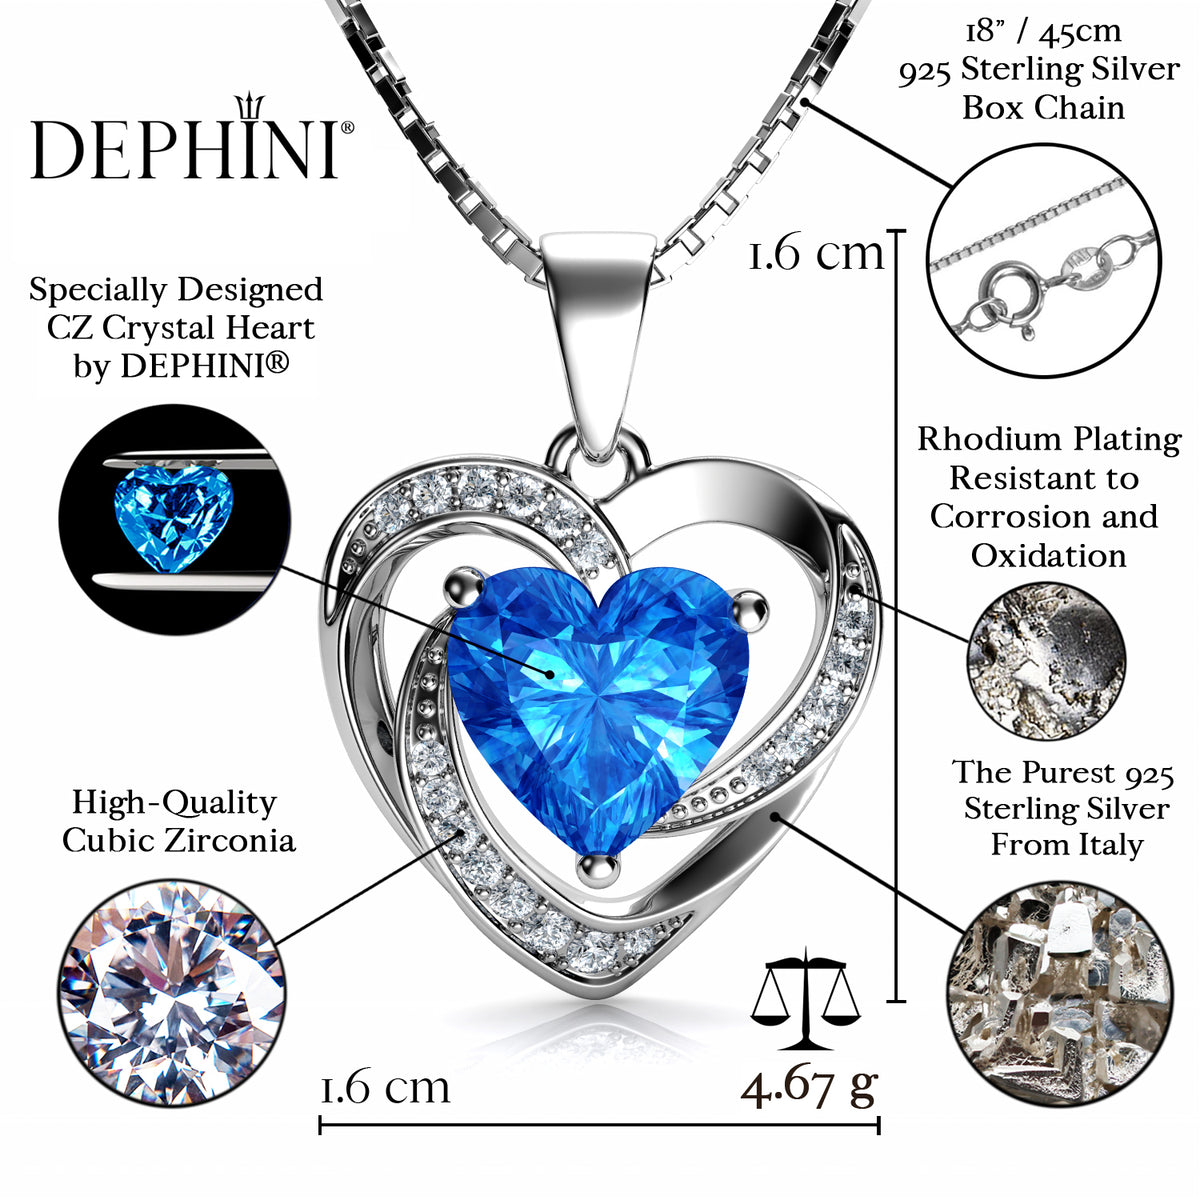 aquamarine heart necklace - 925 Sterling Silver CZ DEPHINI